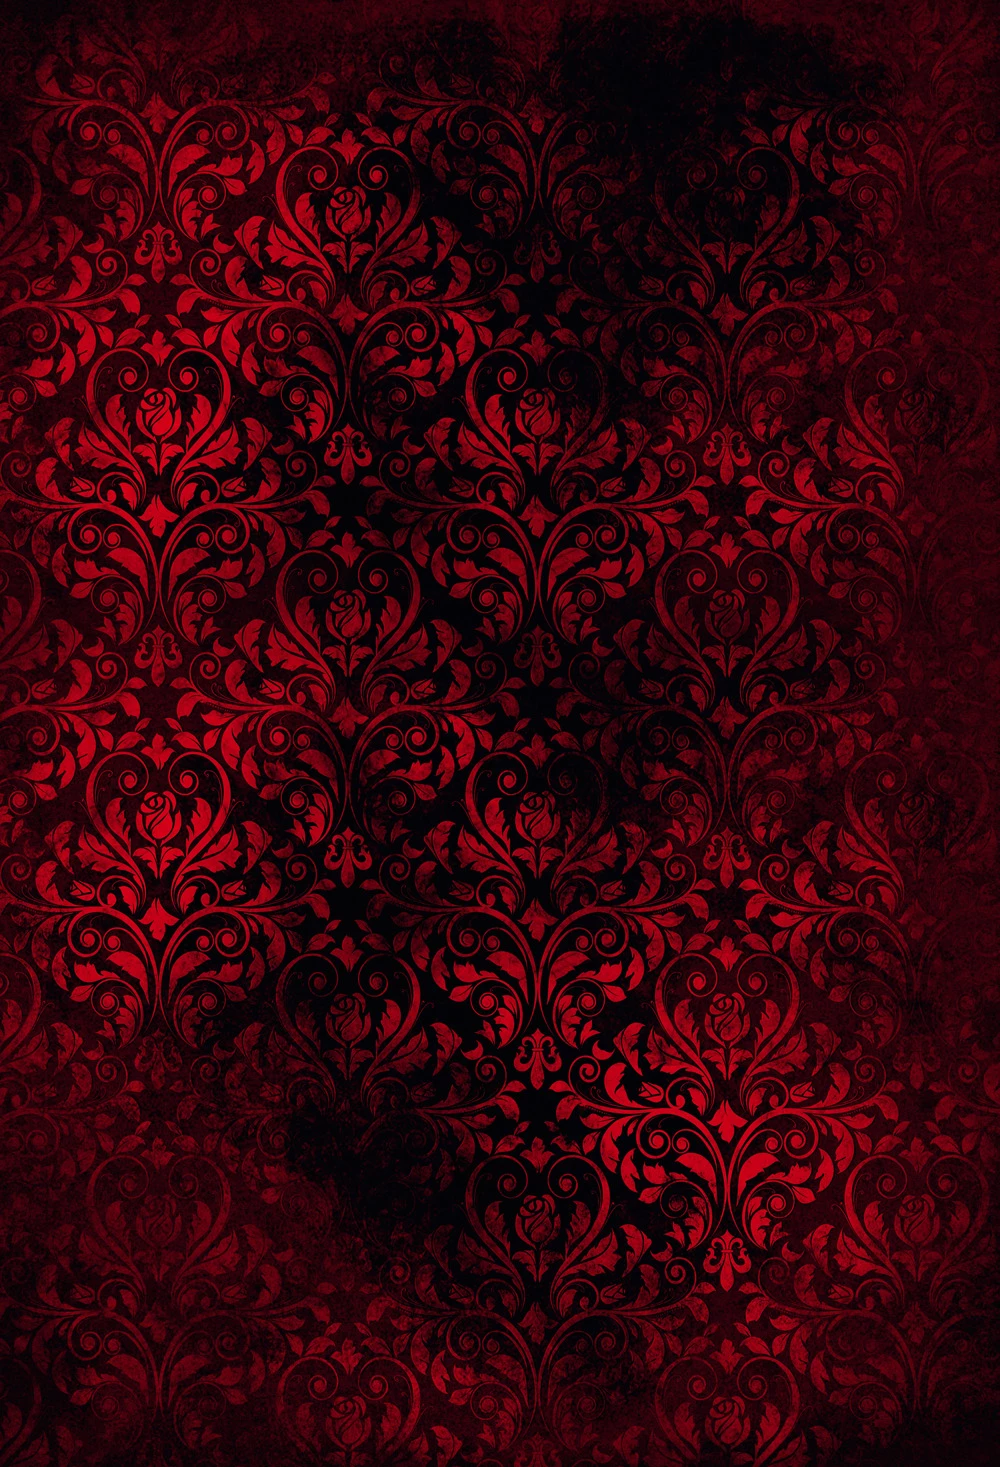 Red And Black Damask Photography Backdrop Great For Studio Photo